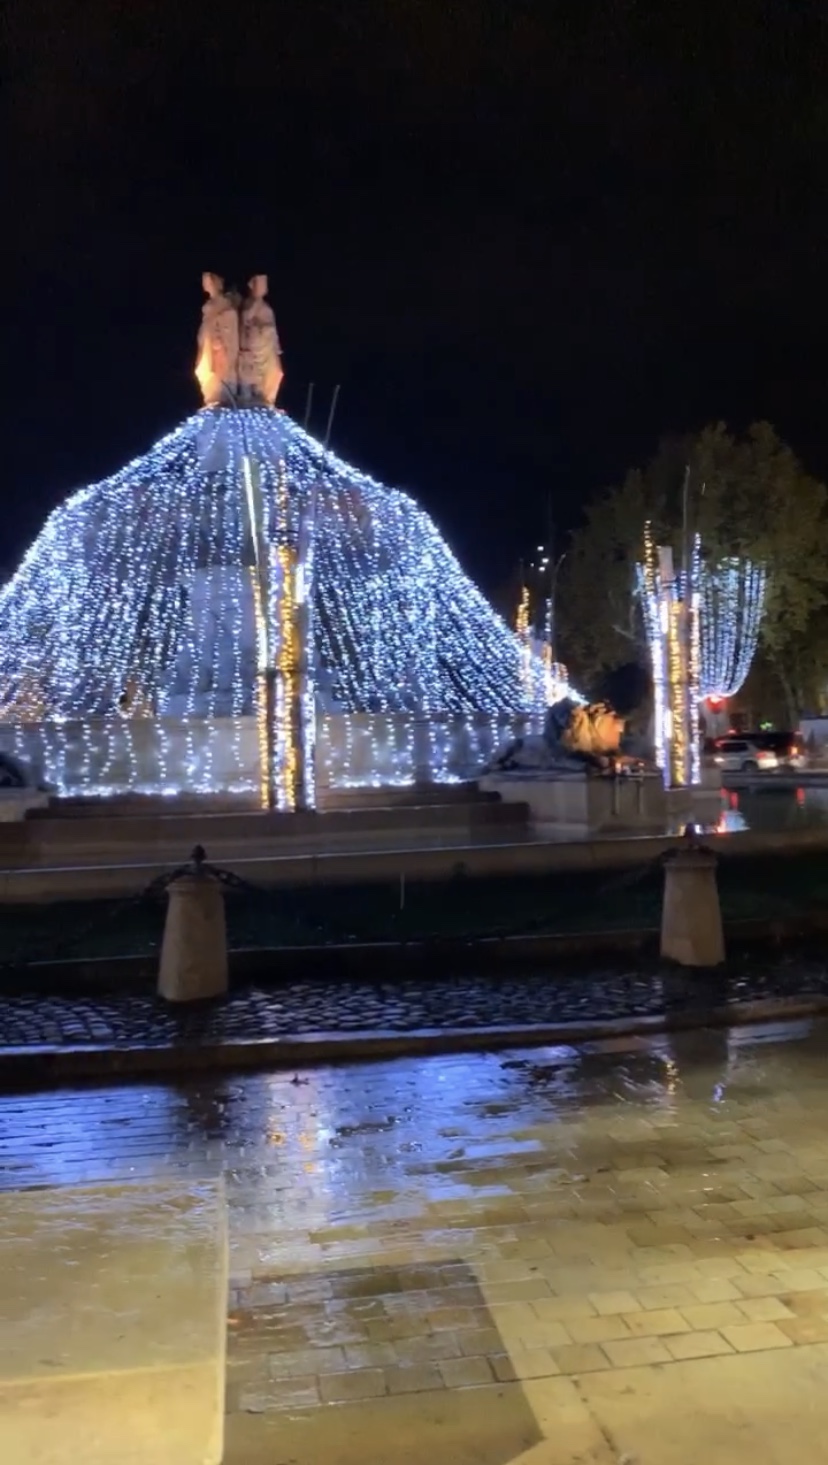 Lights shaped like trees on the Rotonde in Aix